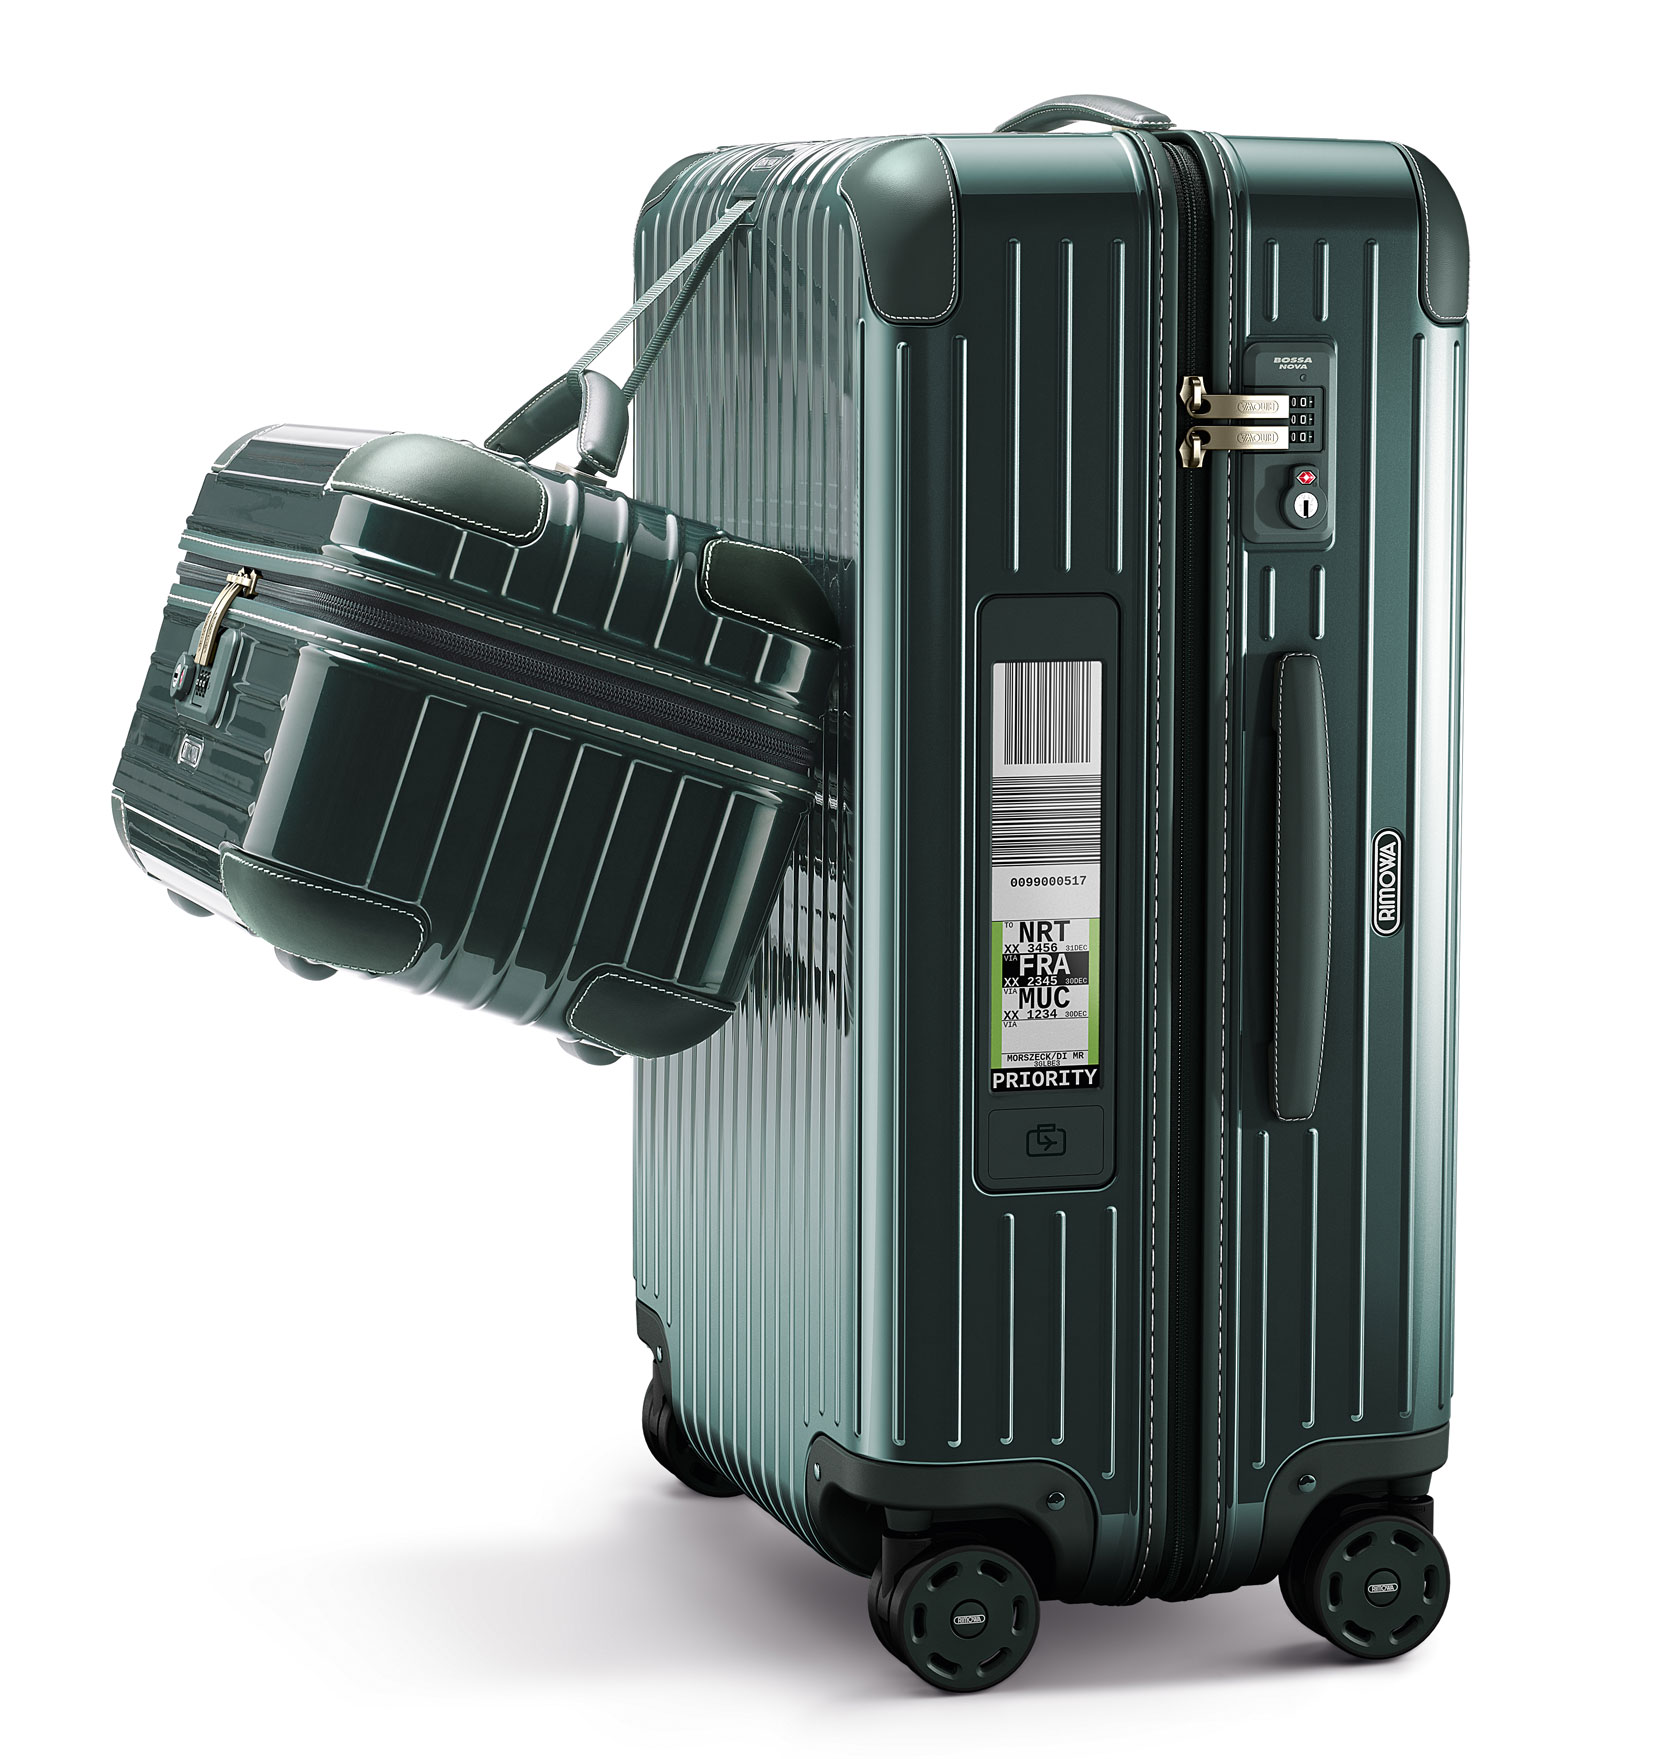 Rimowa’s Latest Suitcases Will Get You to Your Destination Faster